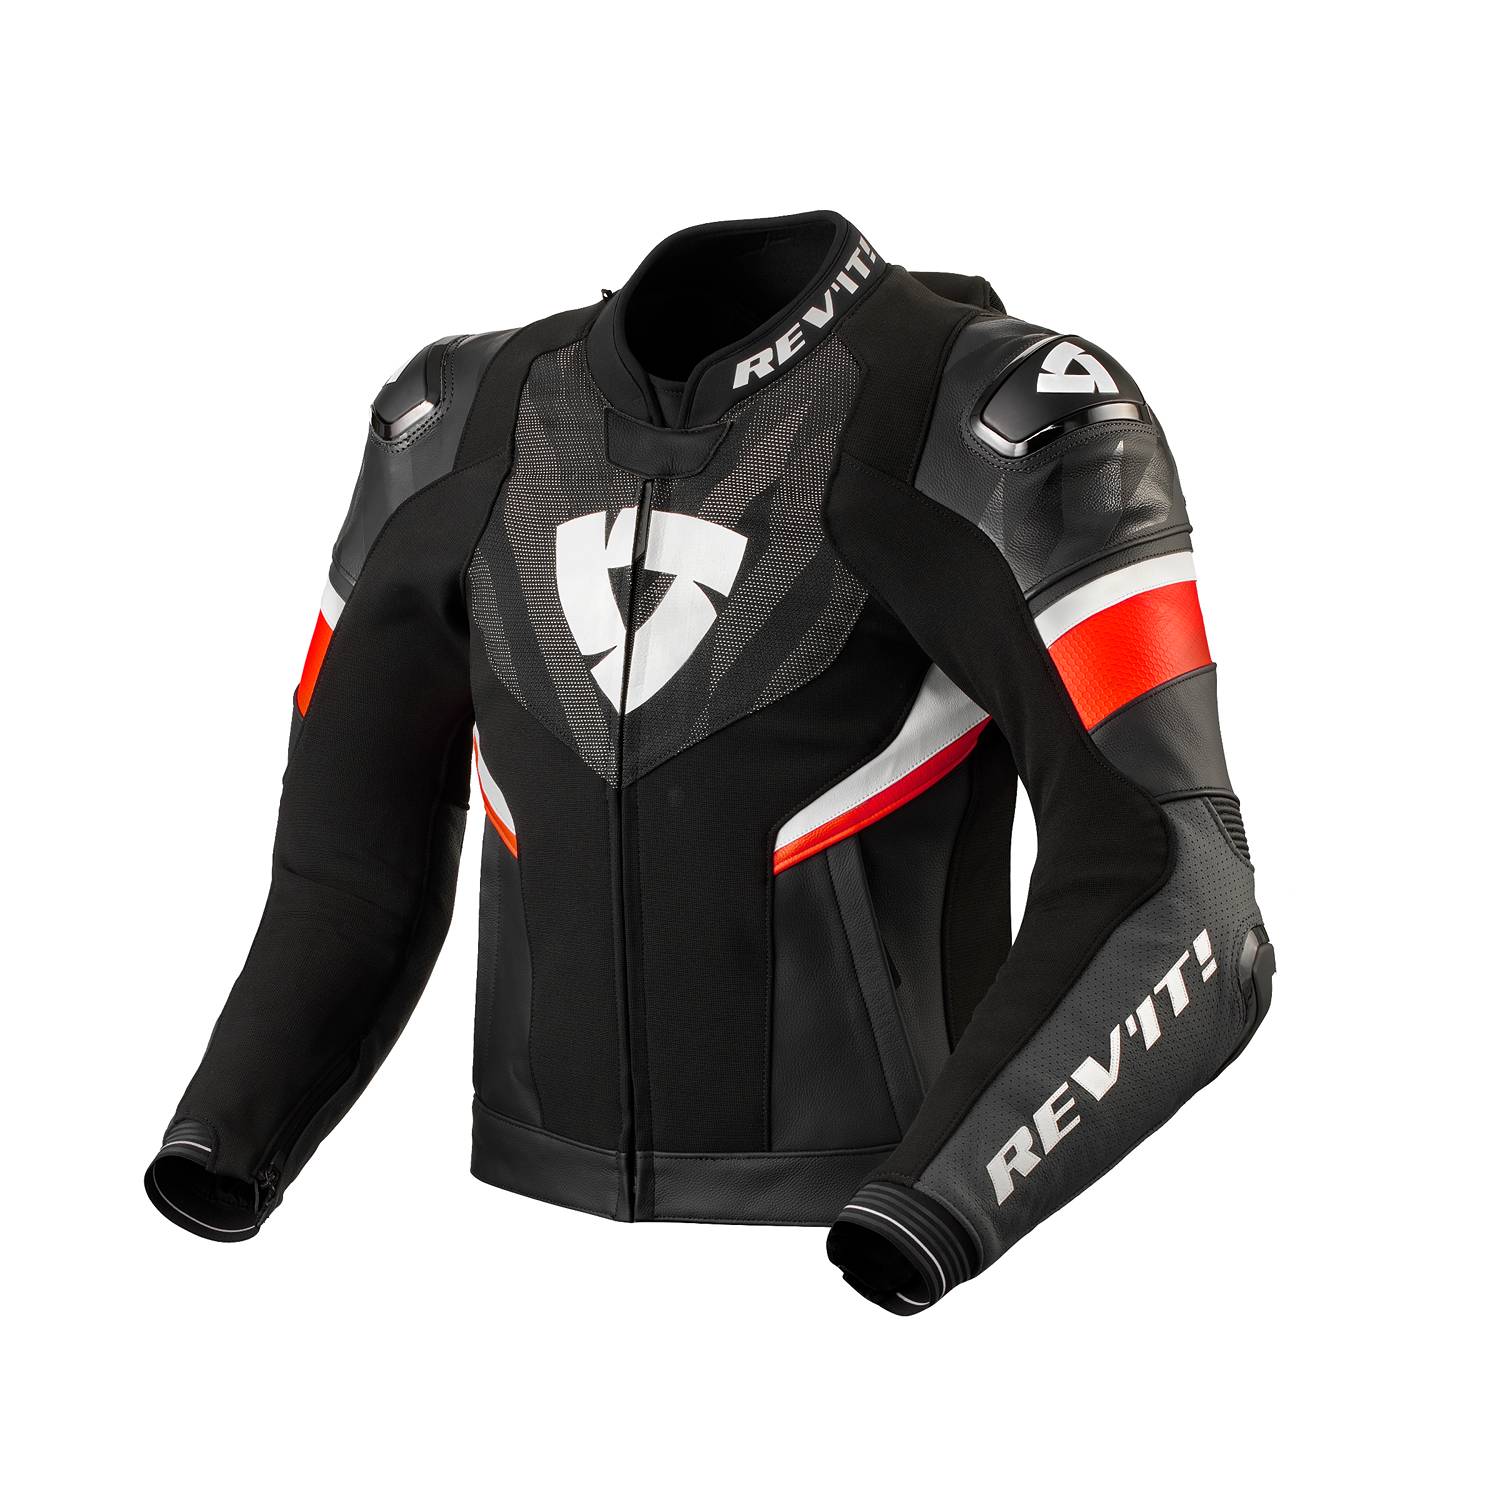 Image of REV'IT! Hyperspeed 2 Pro Jacket Black Neon Red Size 50 ID 8700001358729